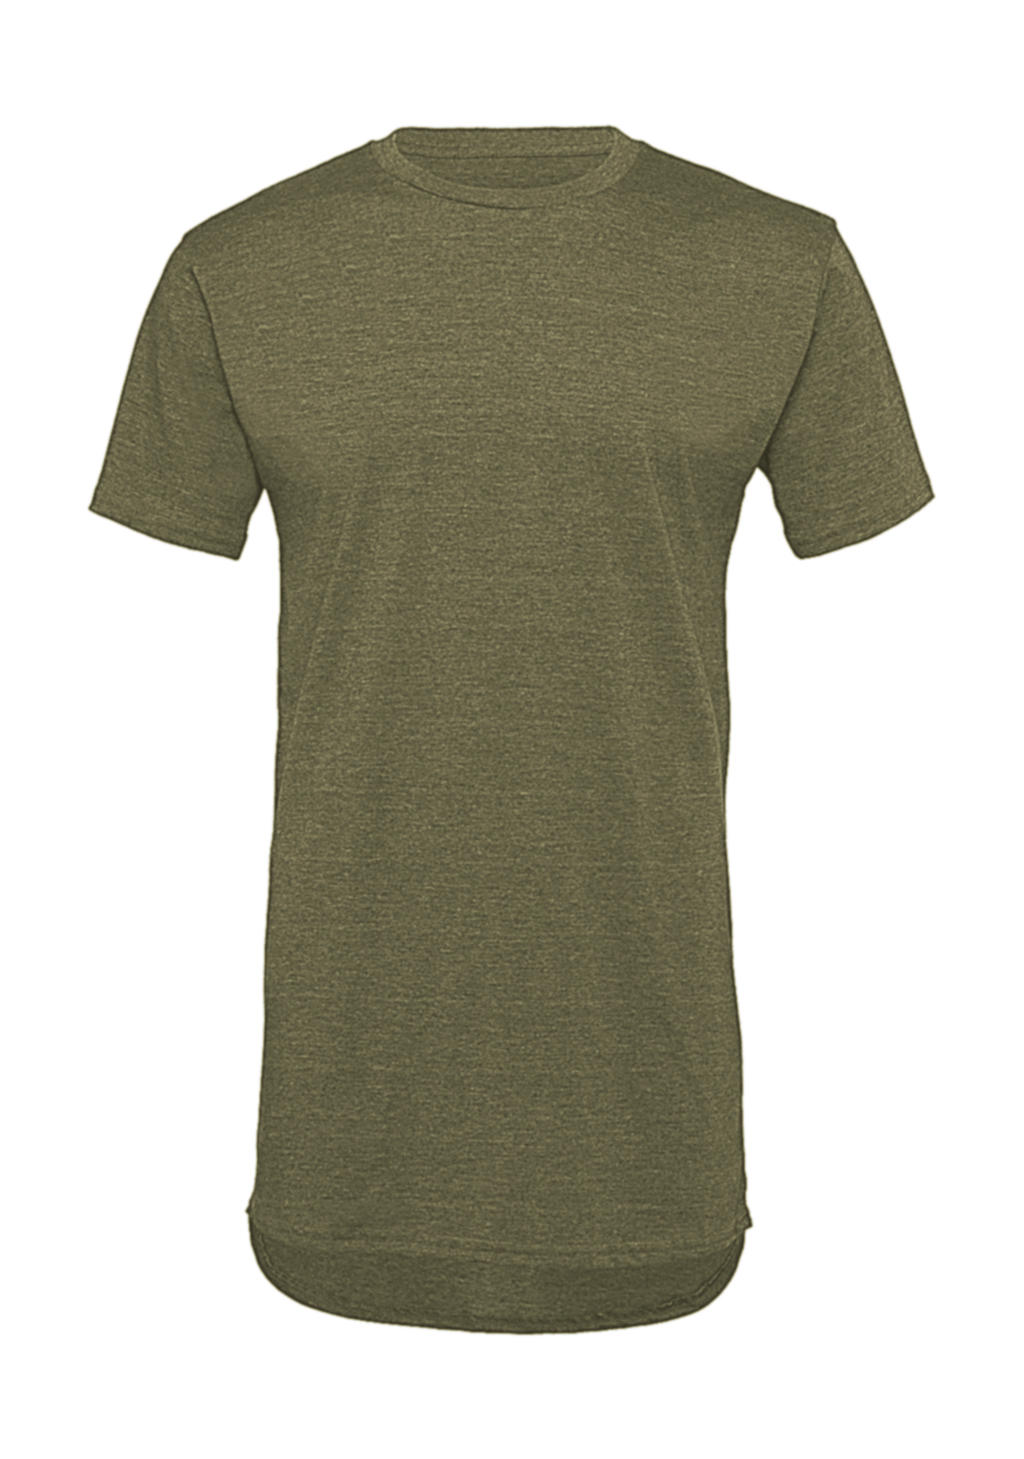  Mens Long Body Urban Tee in Farbe Heather Olive